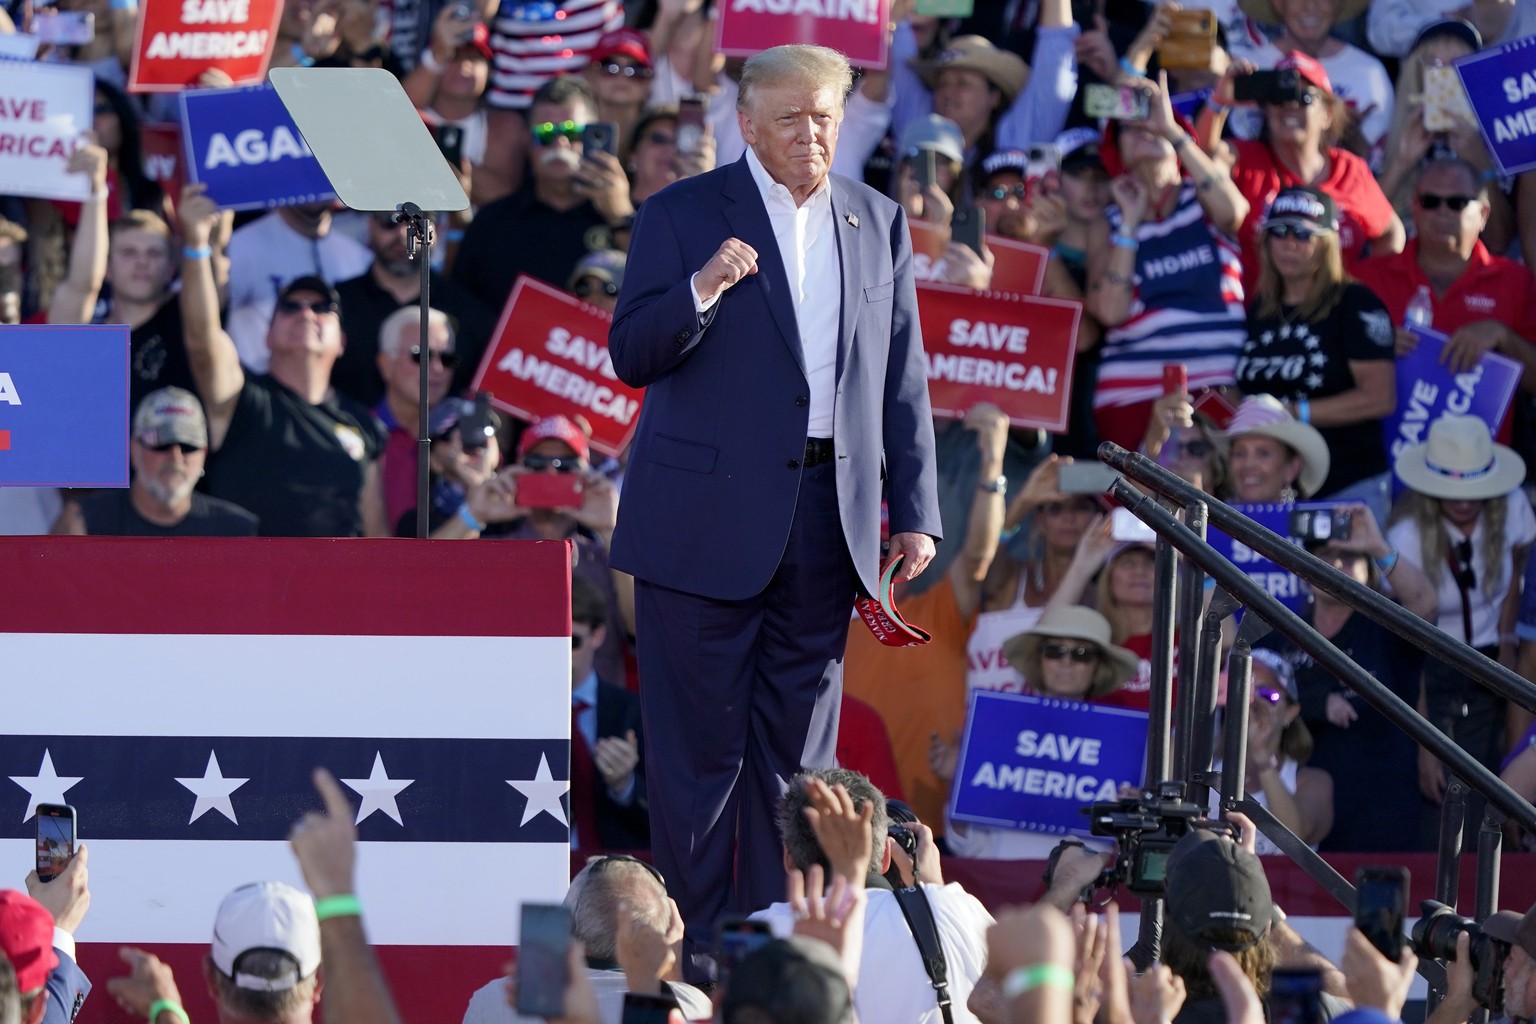 Former President Donald Trump acknowledges supporters at a rally, Sunday, Oct. 9, 2022, in Mesa, Ariz. (AP Photo/Matt York)